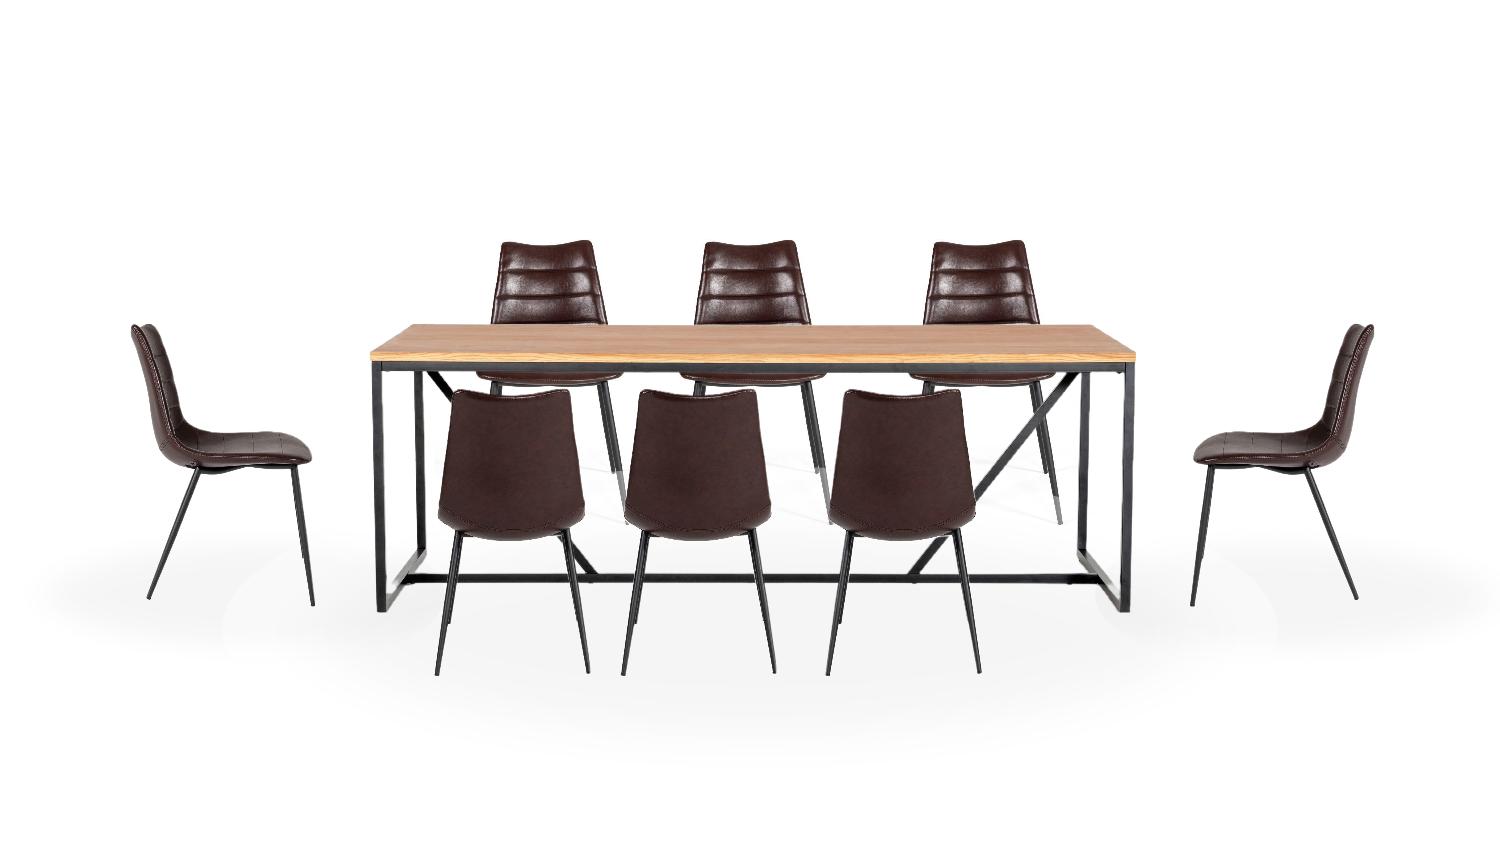 Contemporary, Modern Dining Room Set Fagan VGEDMD220005-9pcs in Oak, Brown Leather